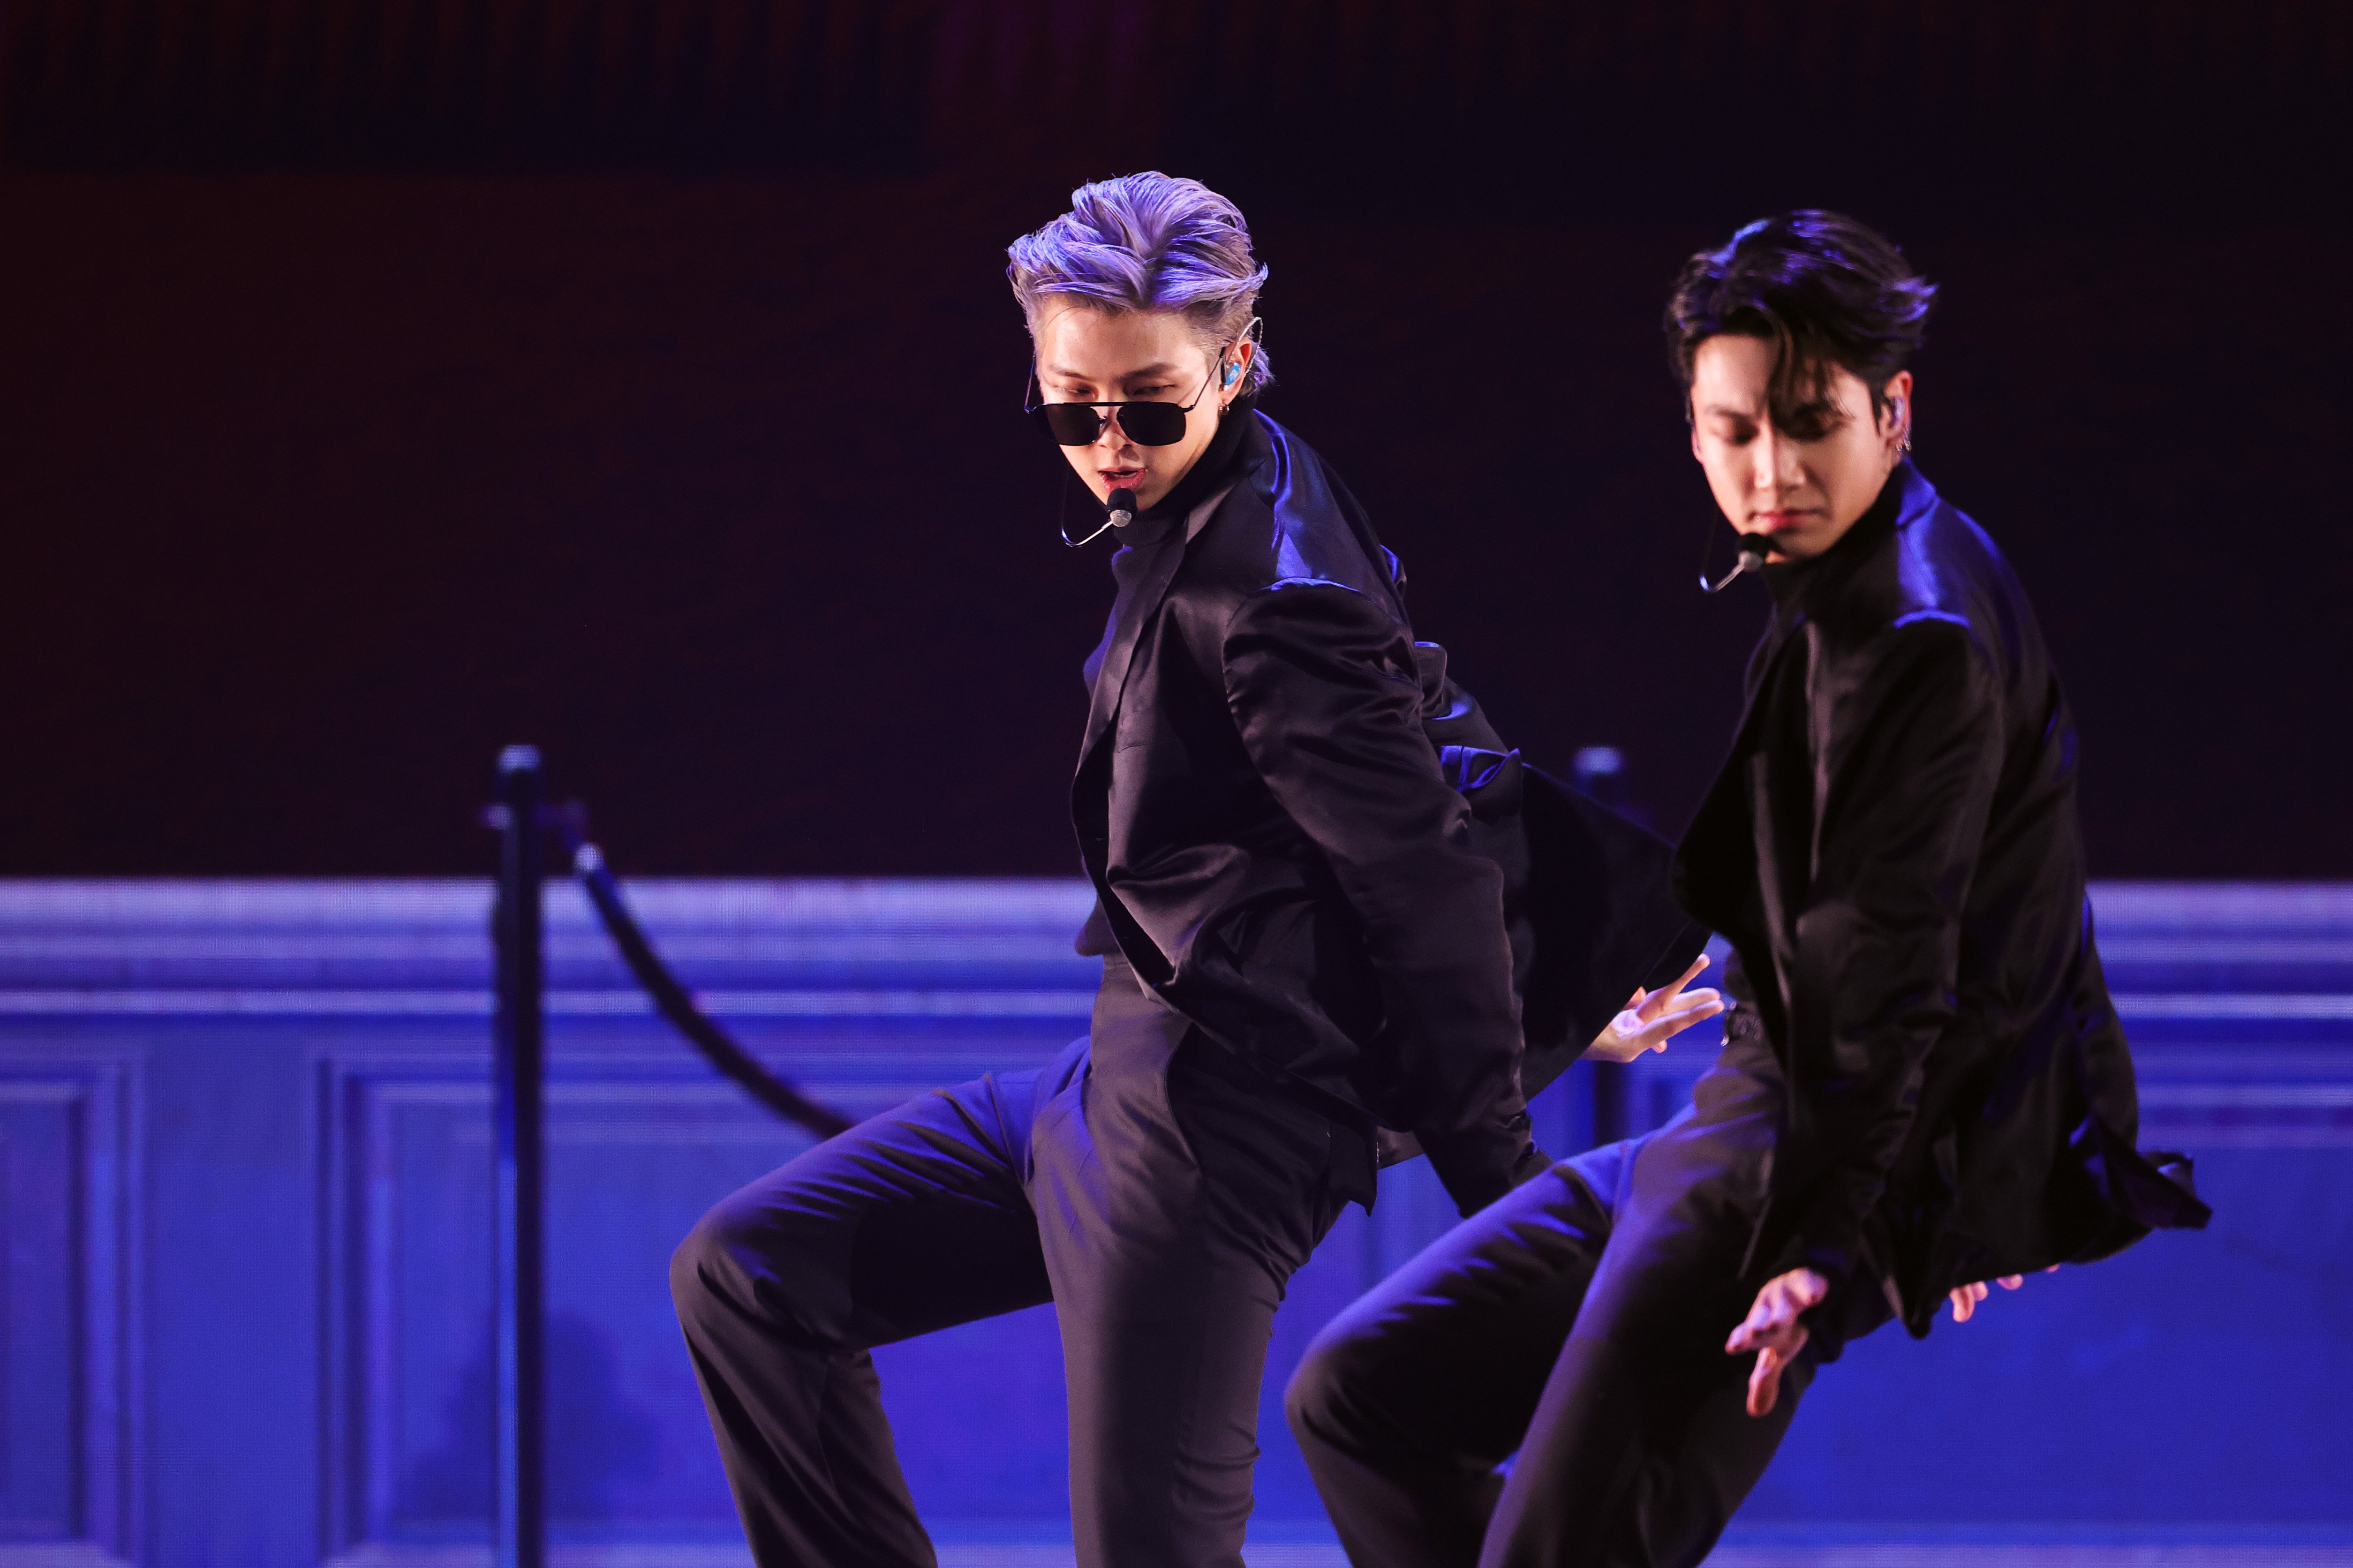 RM and Jungkook of BTS perform during the 64th Annual GRAMMY Awards